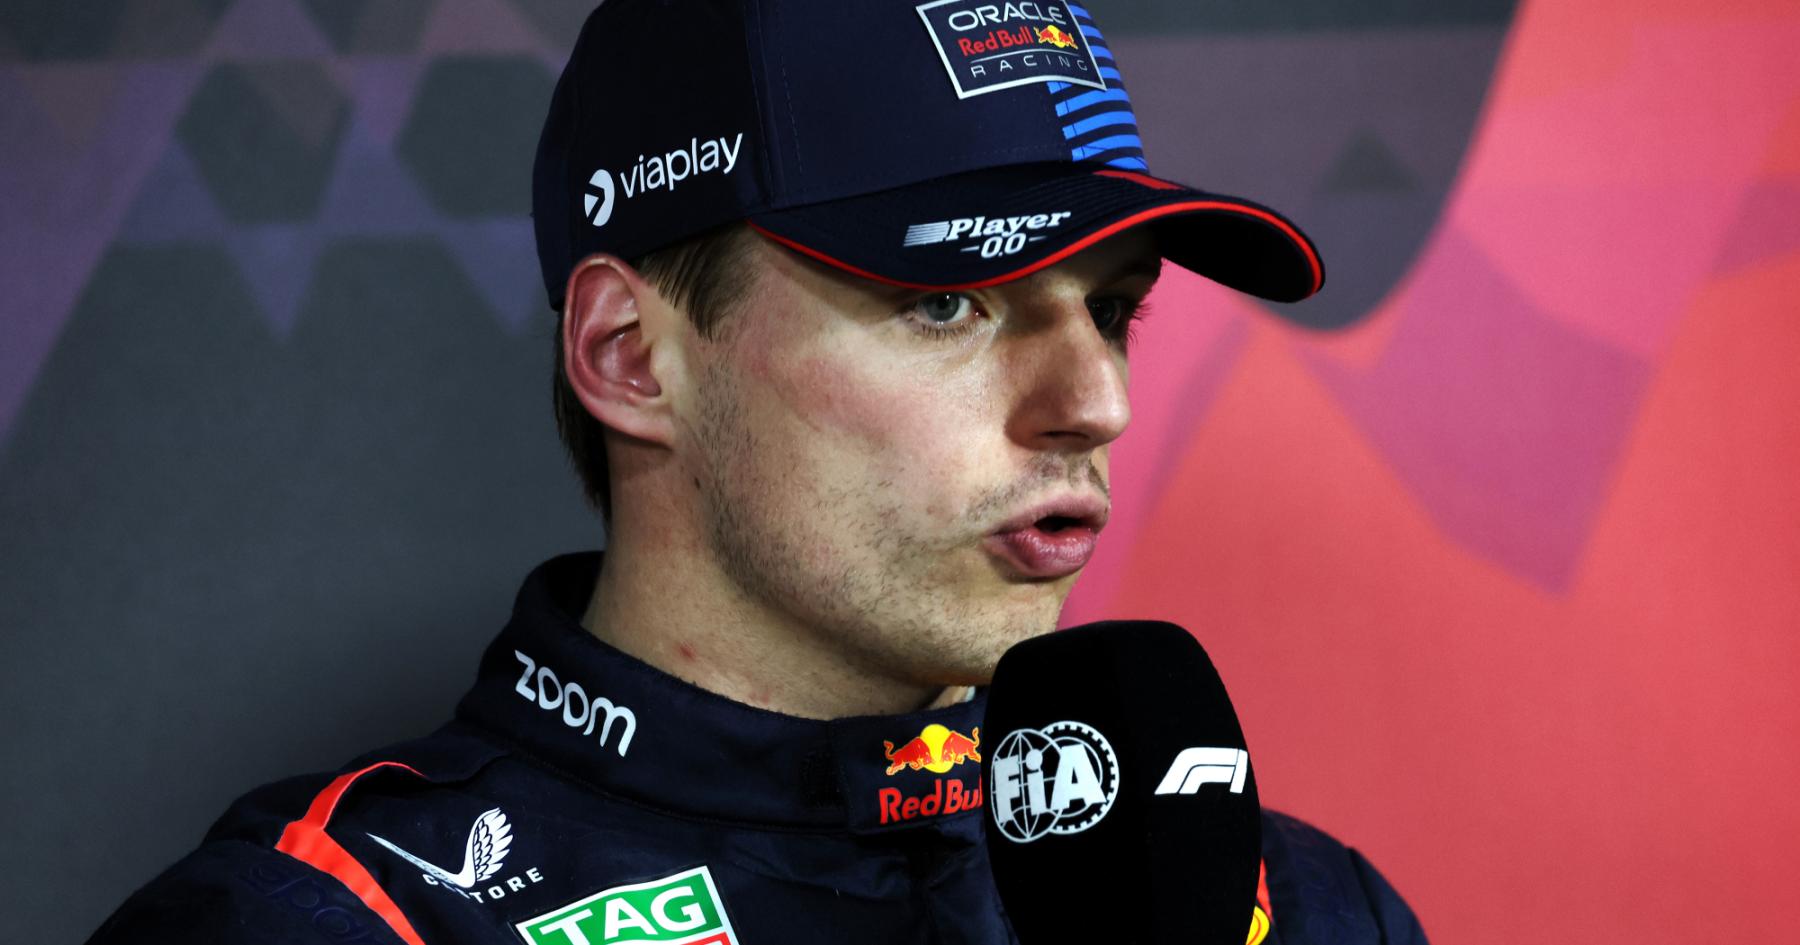 Game-Changer: Verstappen Nears Historic Move to Mercedes Amid Red Bull Drama